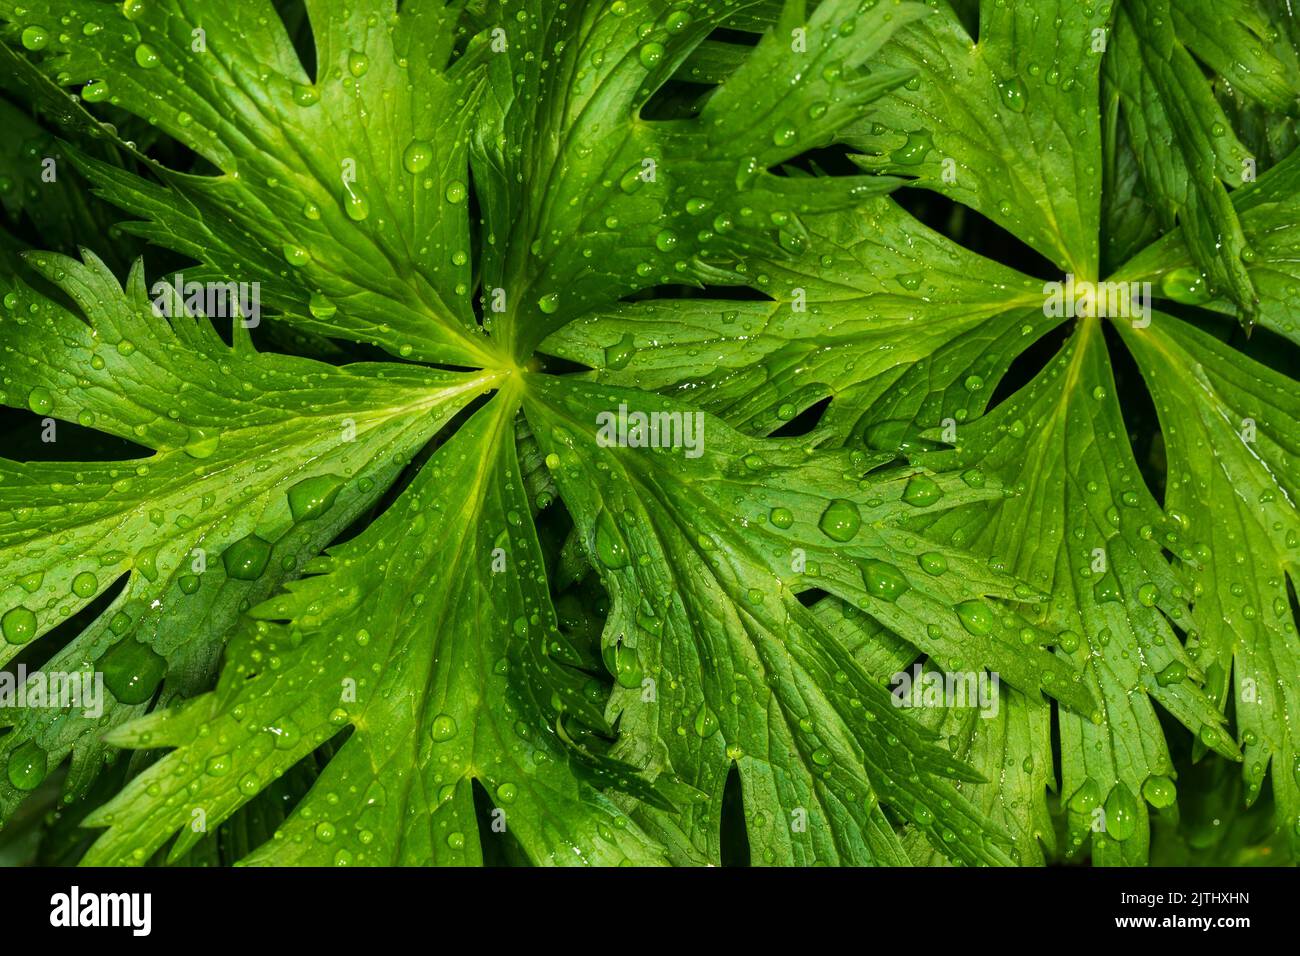 Green carved leaves with water drops. Abstract natural background. Macro photography. Stock Photo